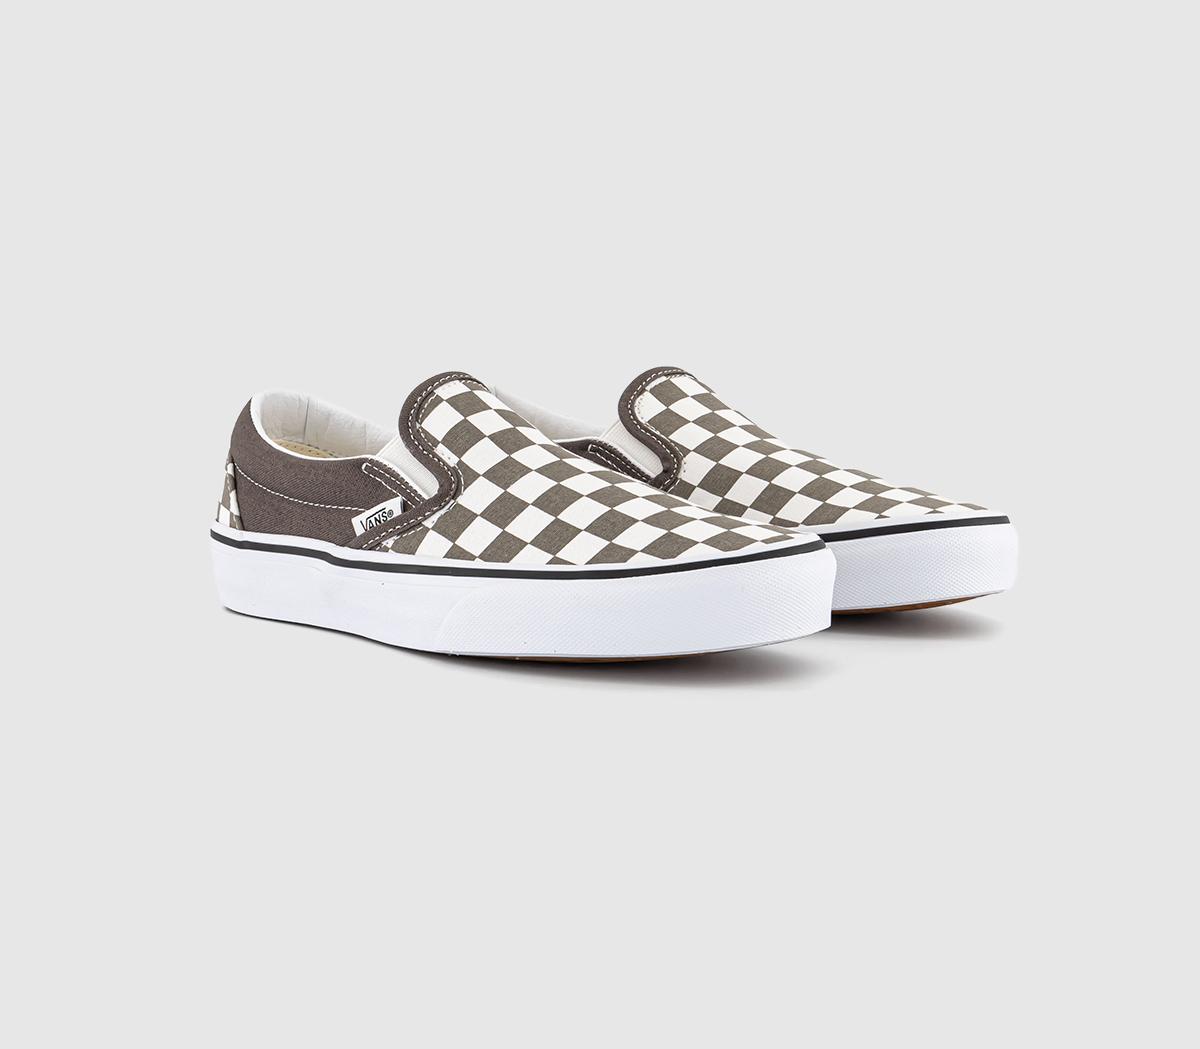 Vans Classic Slip On Trainers Color Theory Checkerboard Bungee Cord, 7